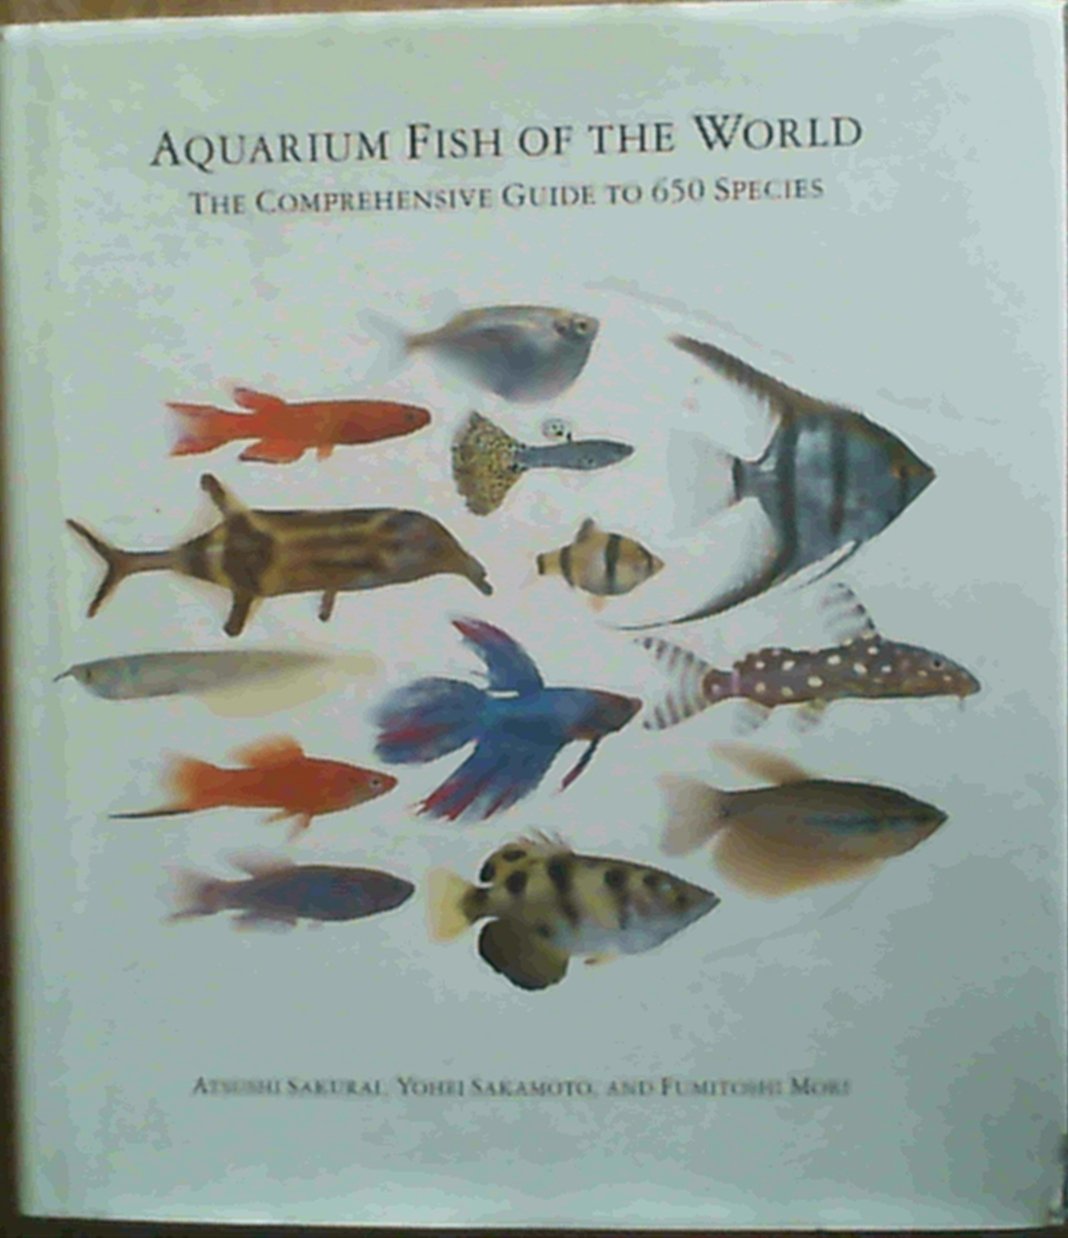 Aquarium Fish of the World: The Comprehensive Guide to 650 Species